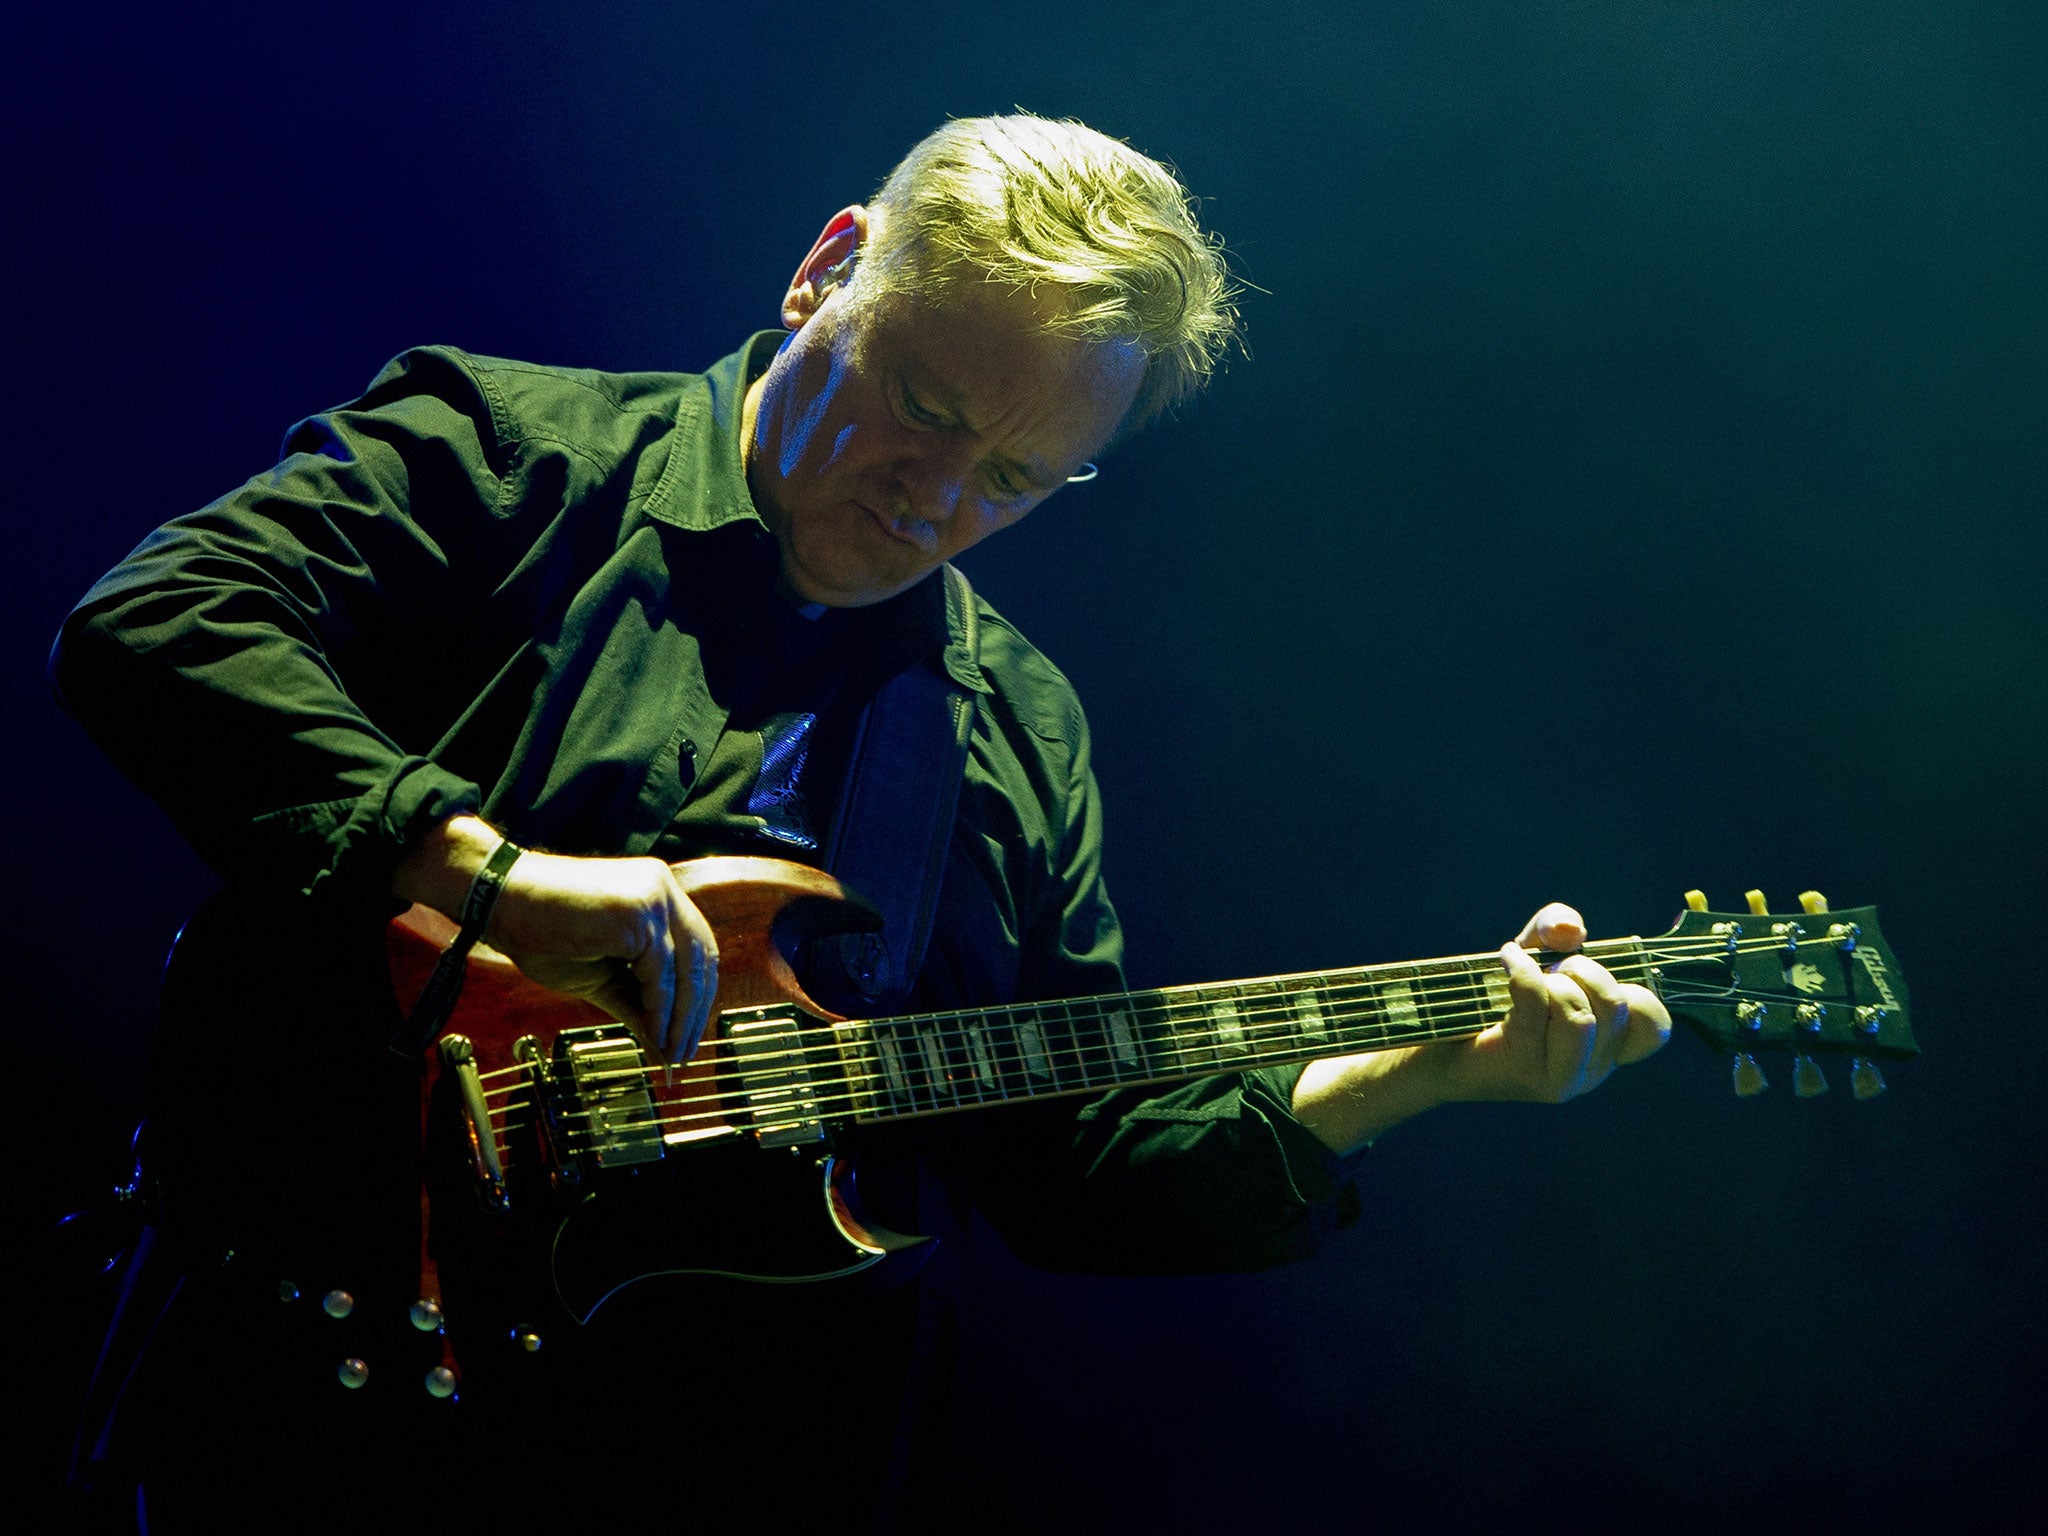 Bernard Sumner of New Order performs at Lollapalooza in Brazil